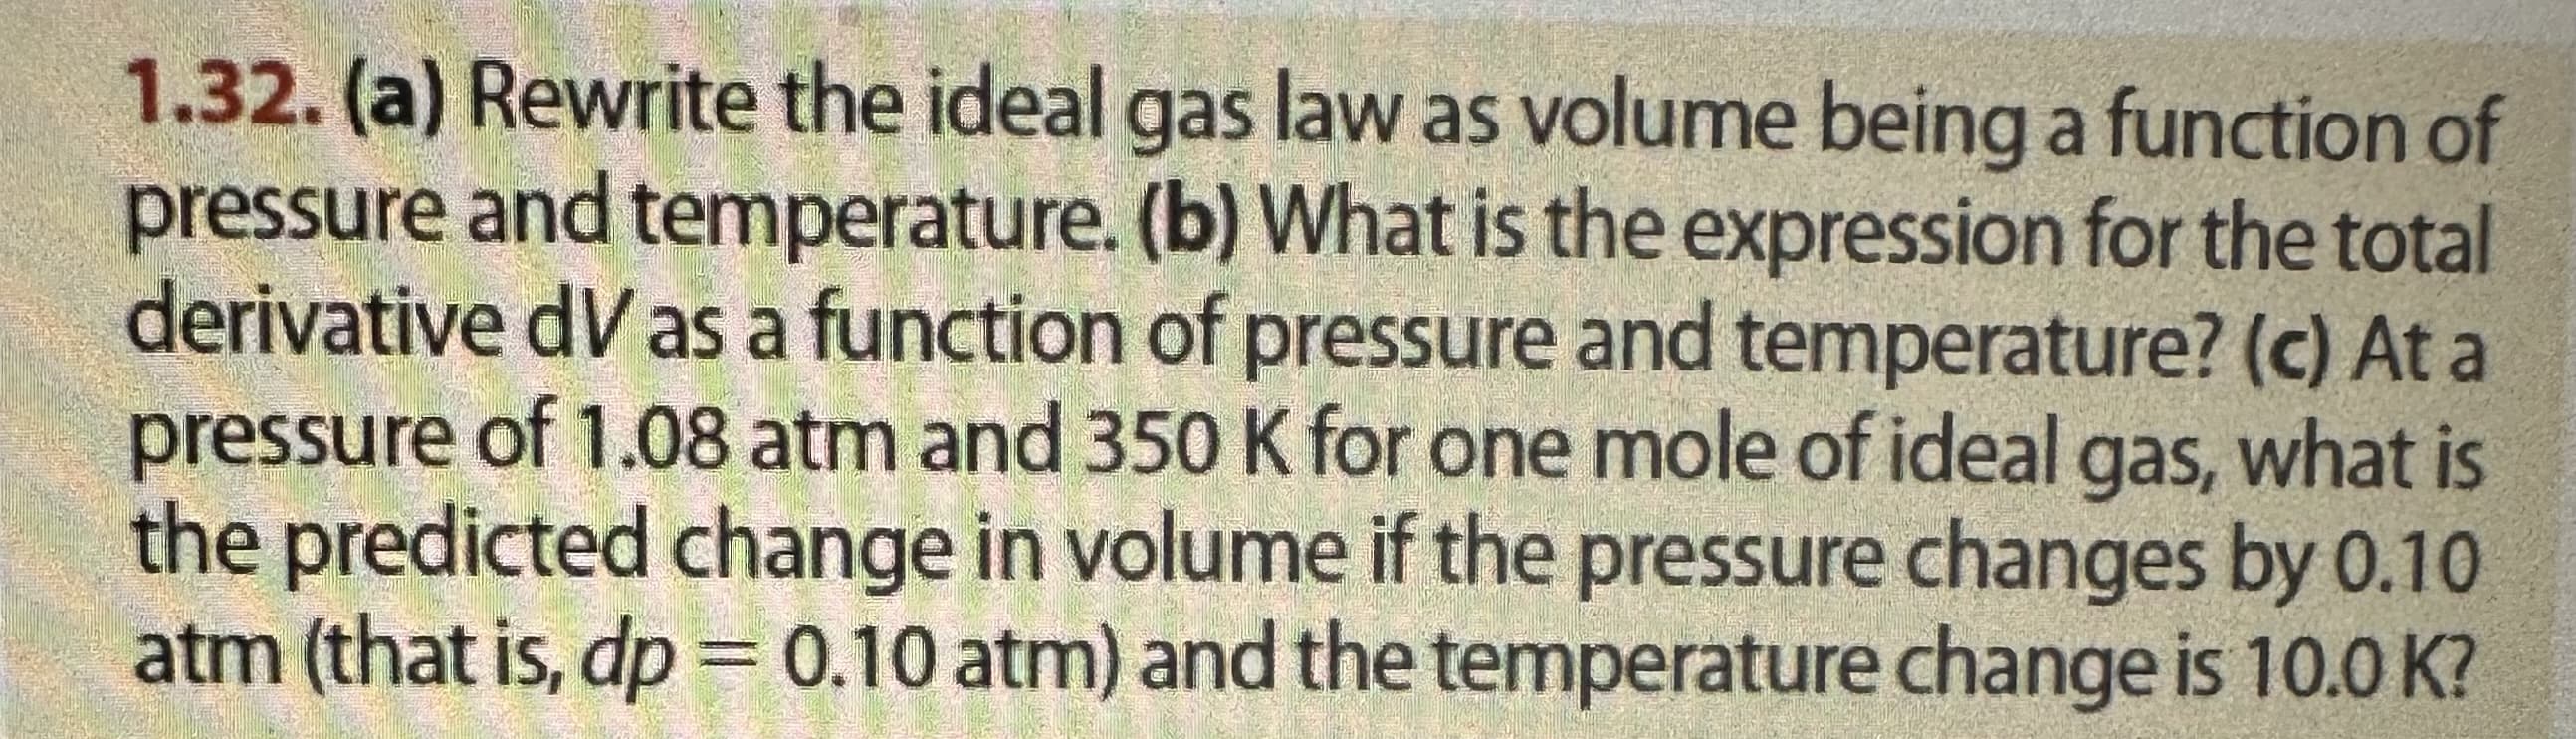 1.32. (a) Rewrite the ideal gas law as volume being a function of
pressure and temperature. (b) What is the expression for the total
derivative dV as a function of pressure and temperature? (c) At a
pressure of 1.08 atm and 350 K for one mole of ideal gas, what is
the predicted change in volume if the pressure changes by 0.10
atm (that is, dp = 0.10 atm) and the temperature change is 10.0 K?